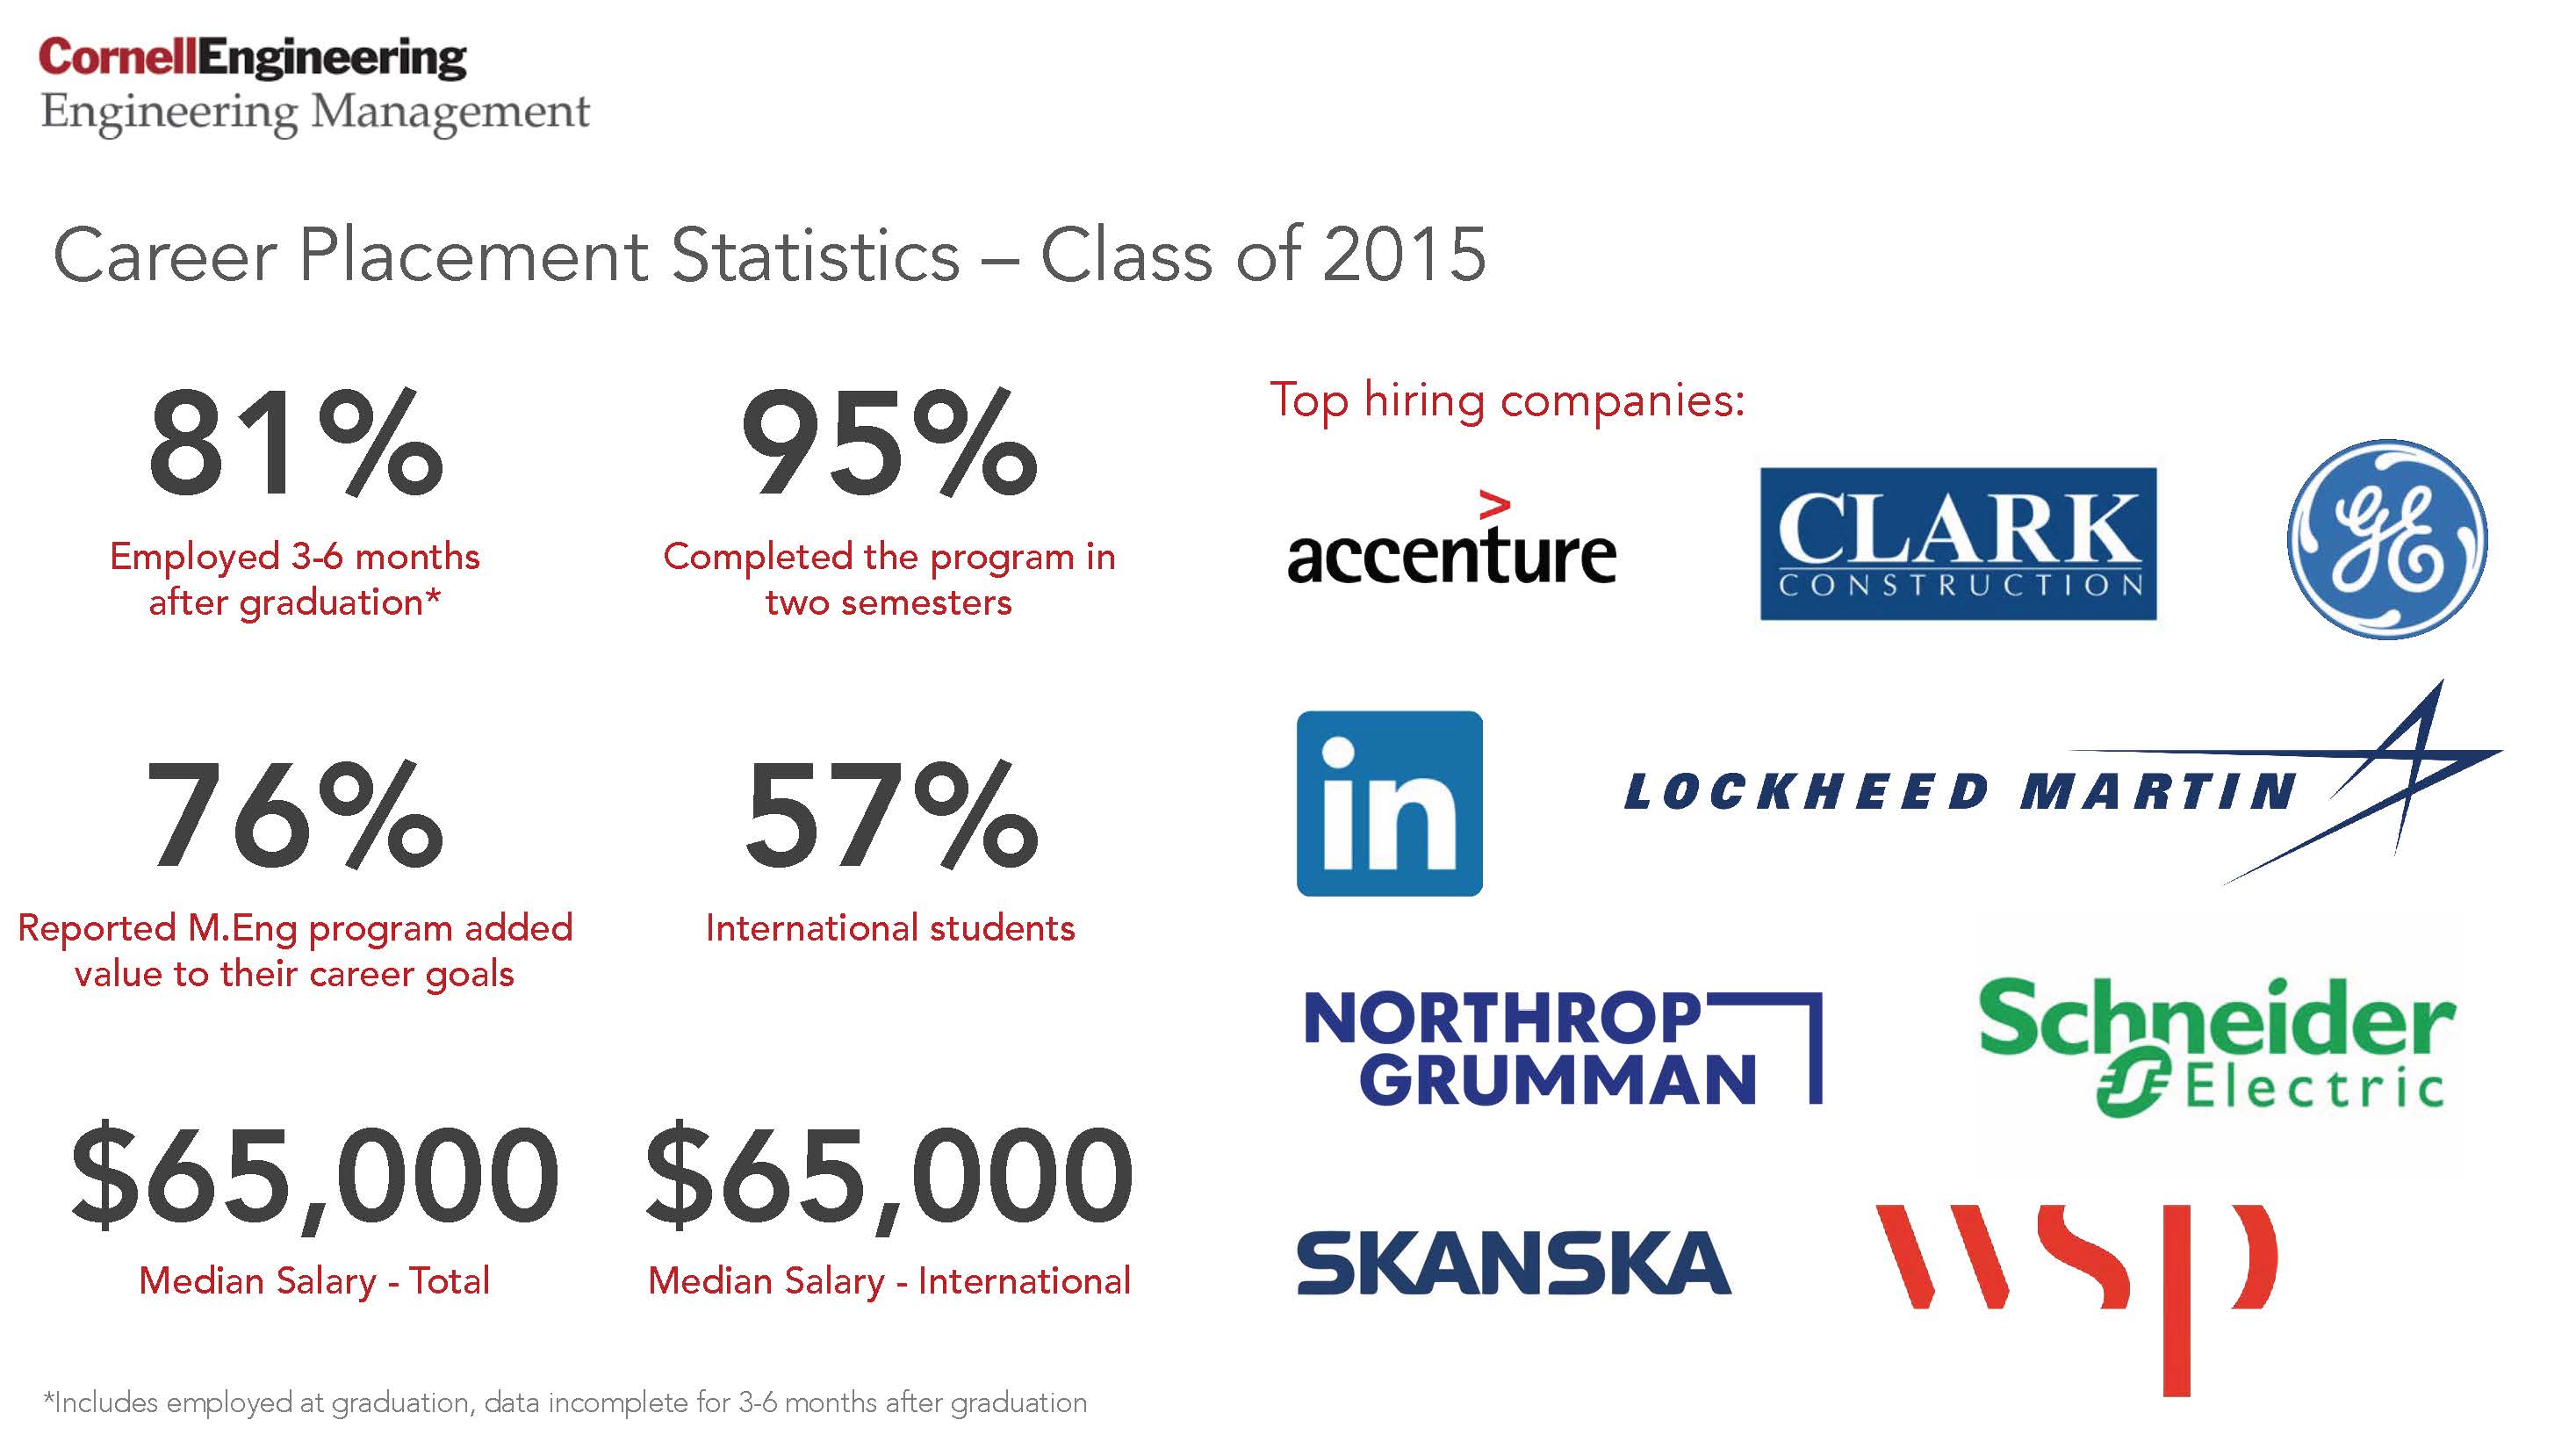 Career Placement Statistics – Class of 2015  81% Employed 3-6 months after graduation* 95% Completed the program in two semesters 76% Reported M.Eng. program added value to their career goals 57% International students $65,000 Median Salary – Total $65,000 Median Salary – International  *Includes employed at graduation, data incomplete for 3-6 months after graduation  Top hiring companies Accenture Clark Construction GE LinkedIn Lockheed Martin Northrop Grumman Schneider Electric Skanska WSP